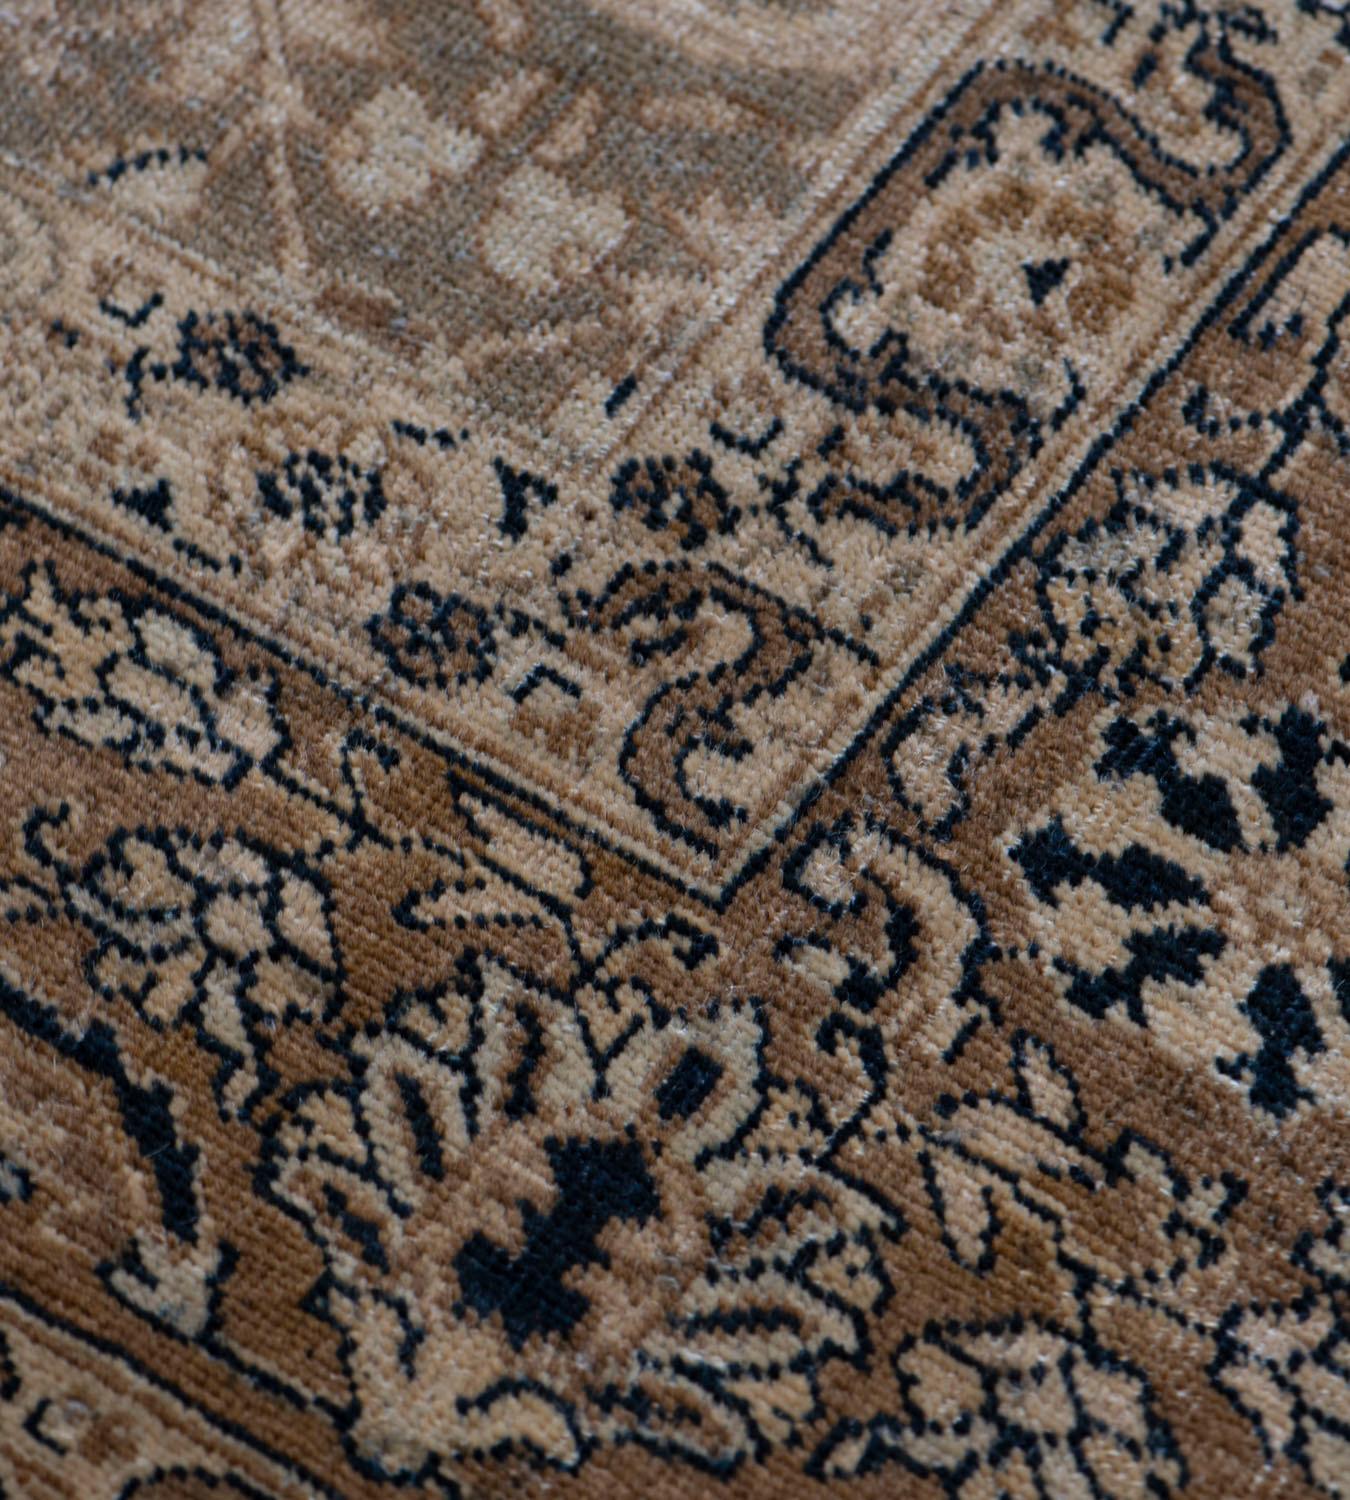 The green-grey field with an overall design of sandy-yellow, charcoal-blue and ivory delicate palmette and floral vine, in a buff-brown border of delicate palmette and floral vine between sandy-yellow floral vine stripes.